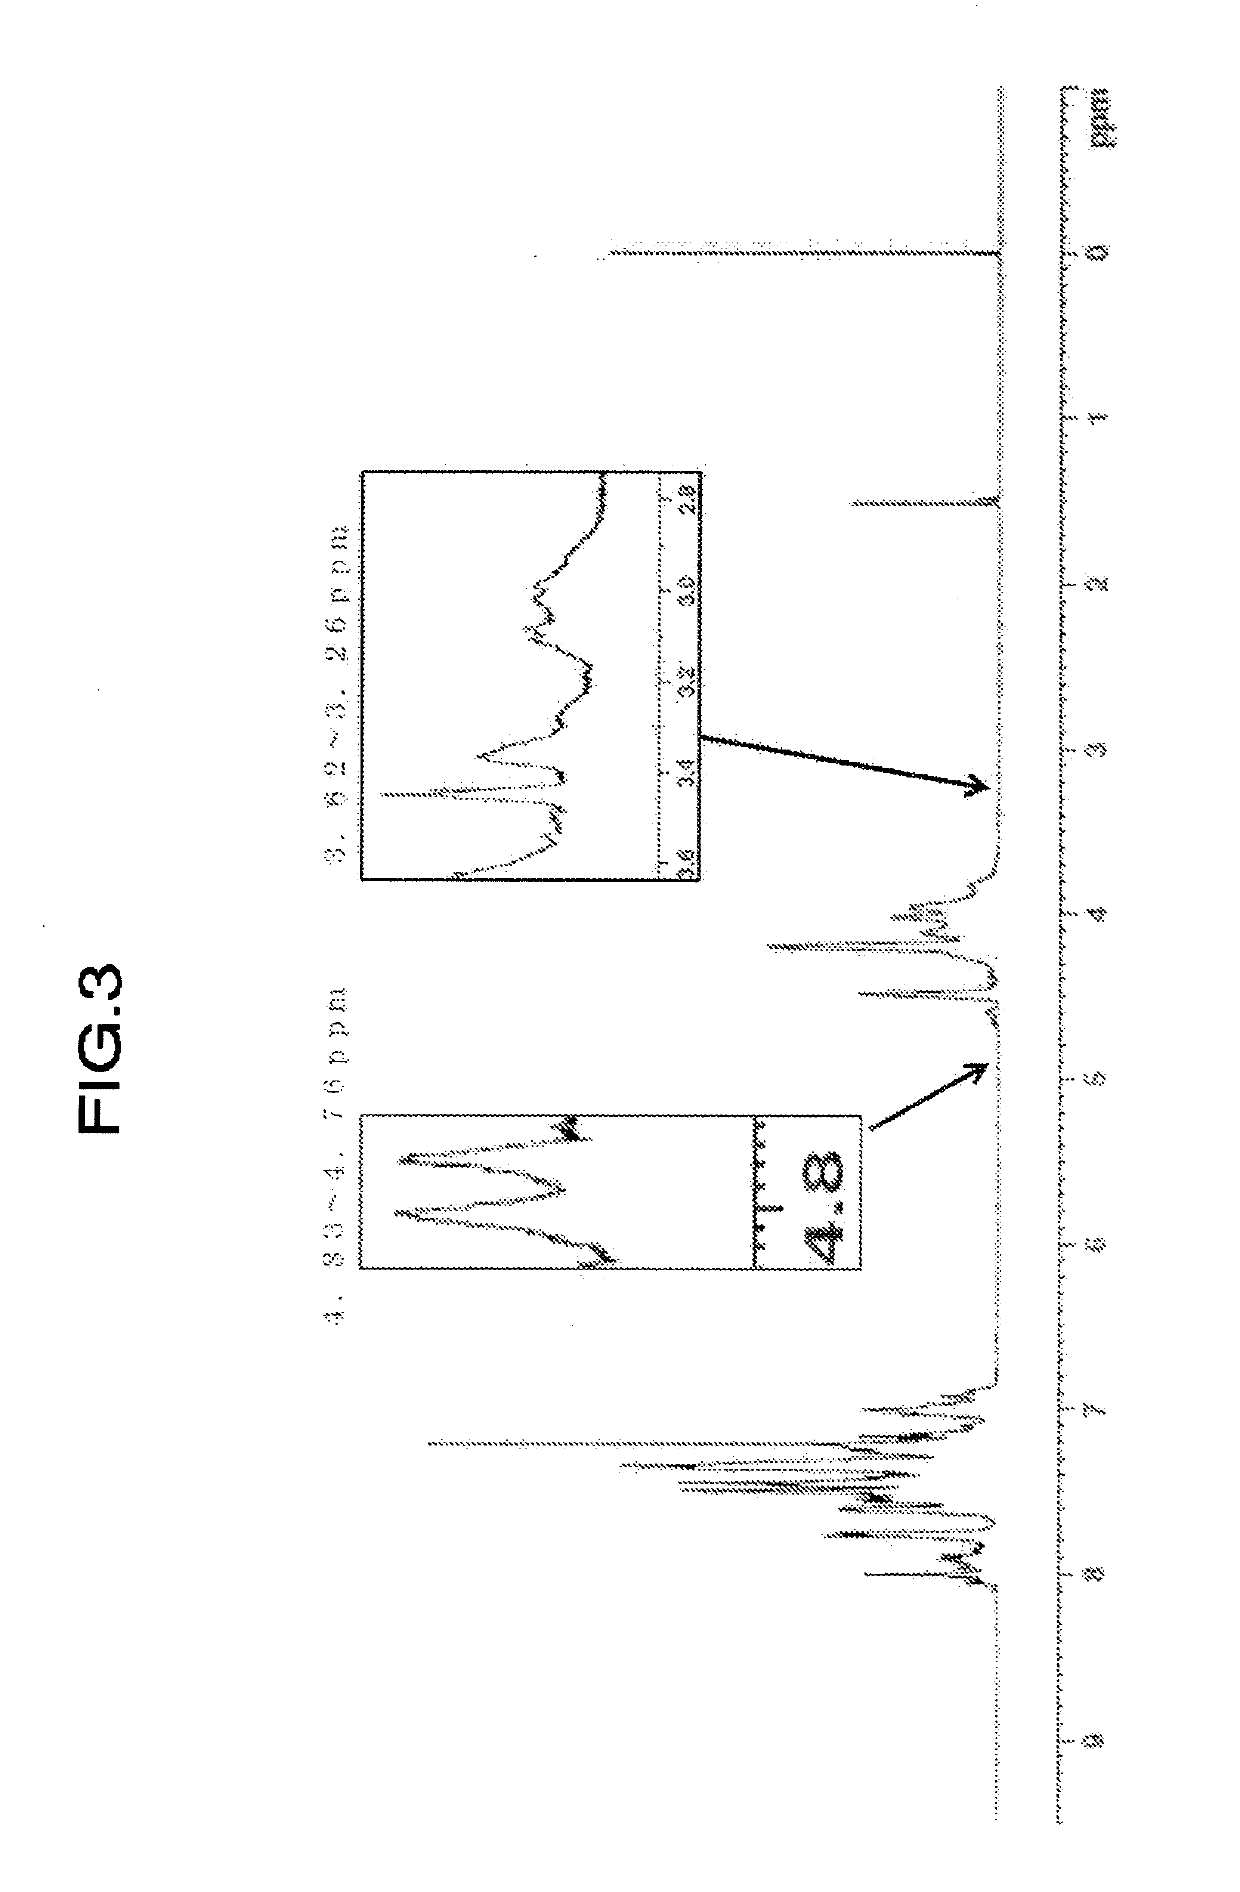 Polycarbonate resin, method for producing same, and optical lens